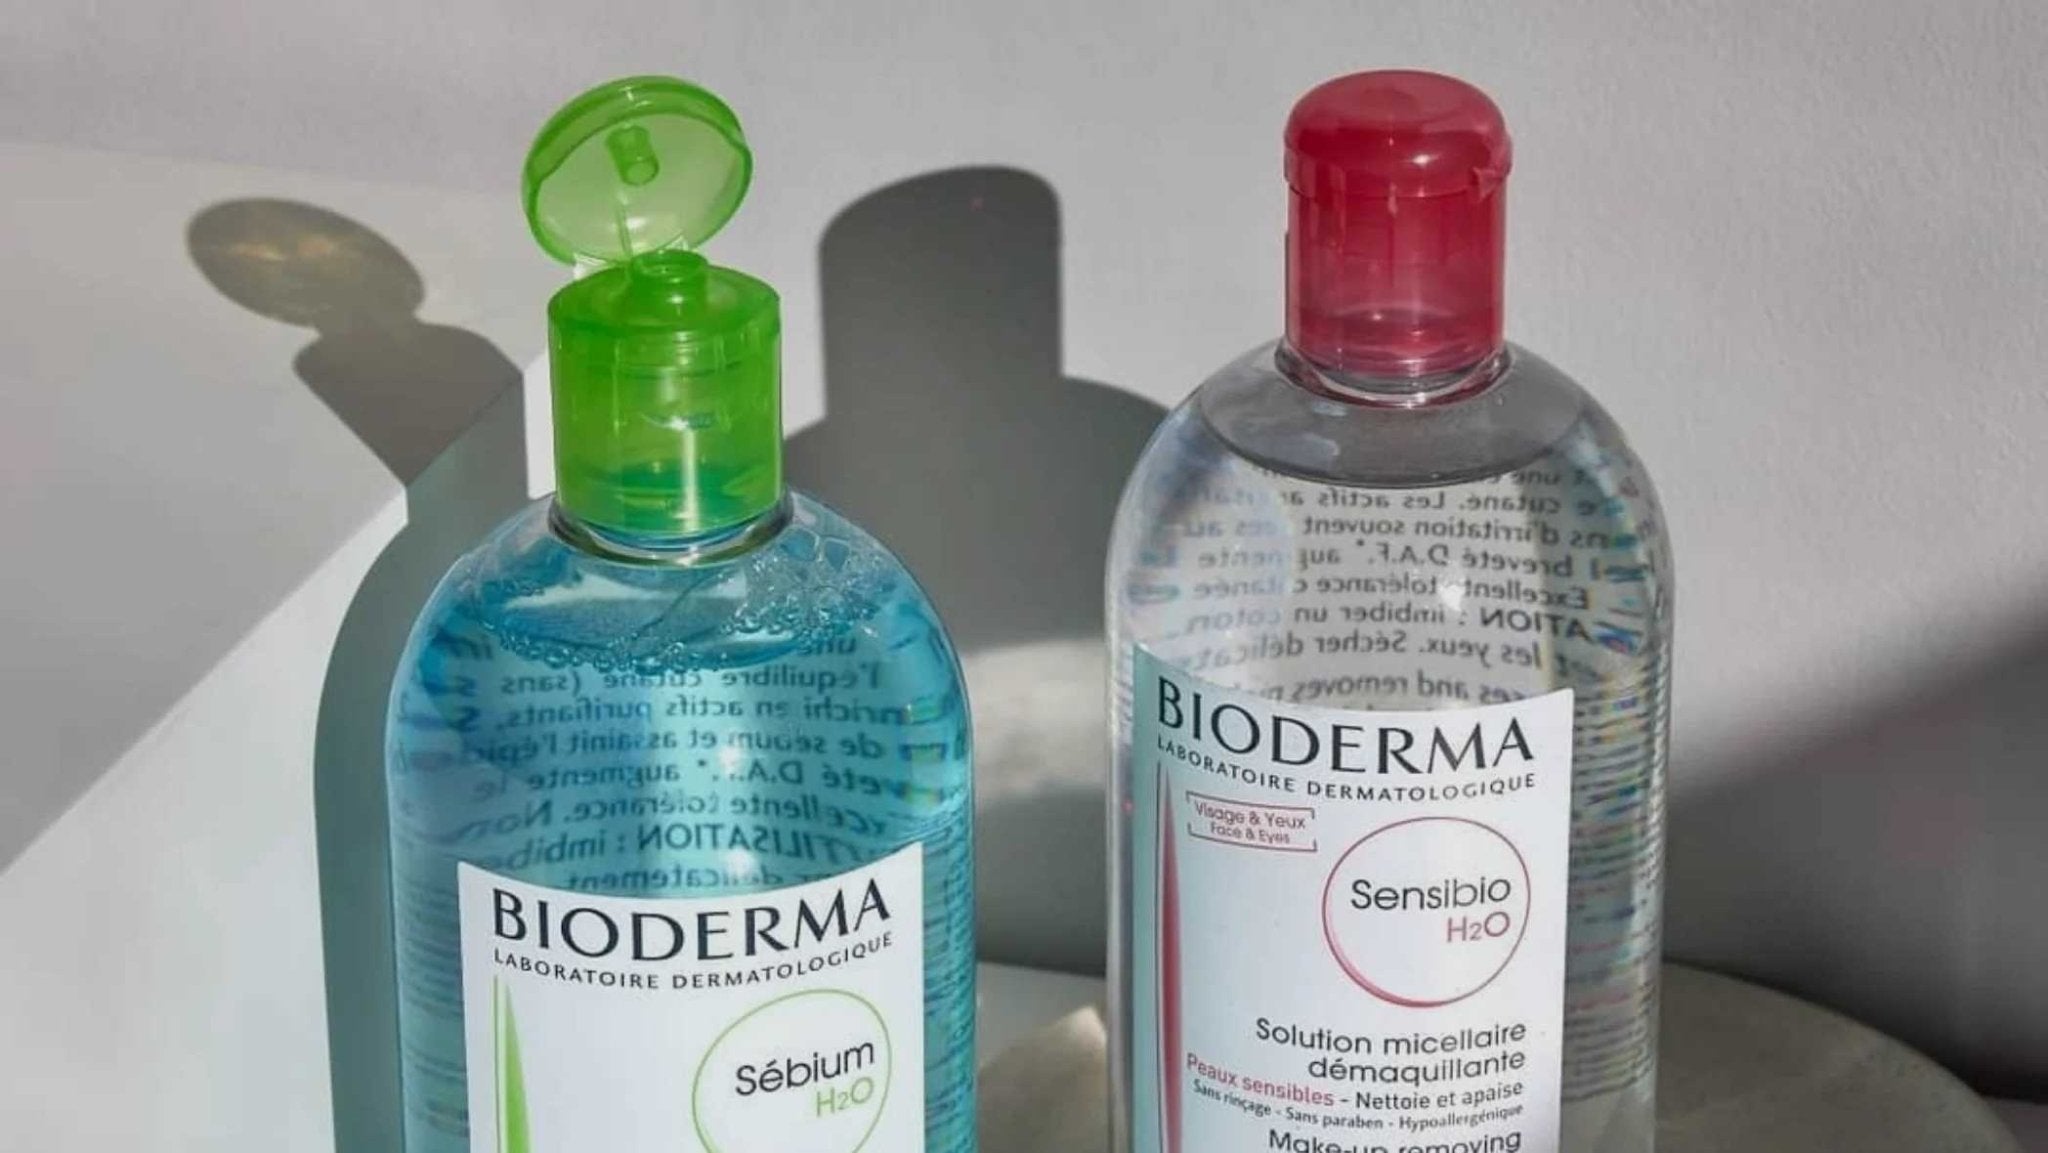 THESE MICELLAR WATERS ARE ON TOP SHELF IN FRENCH CABINETS - French Beauty Co.